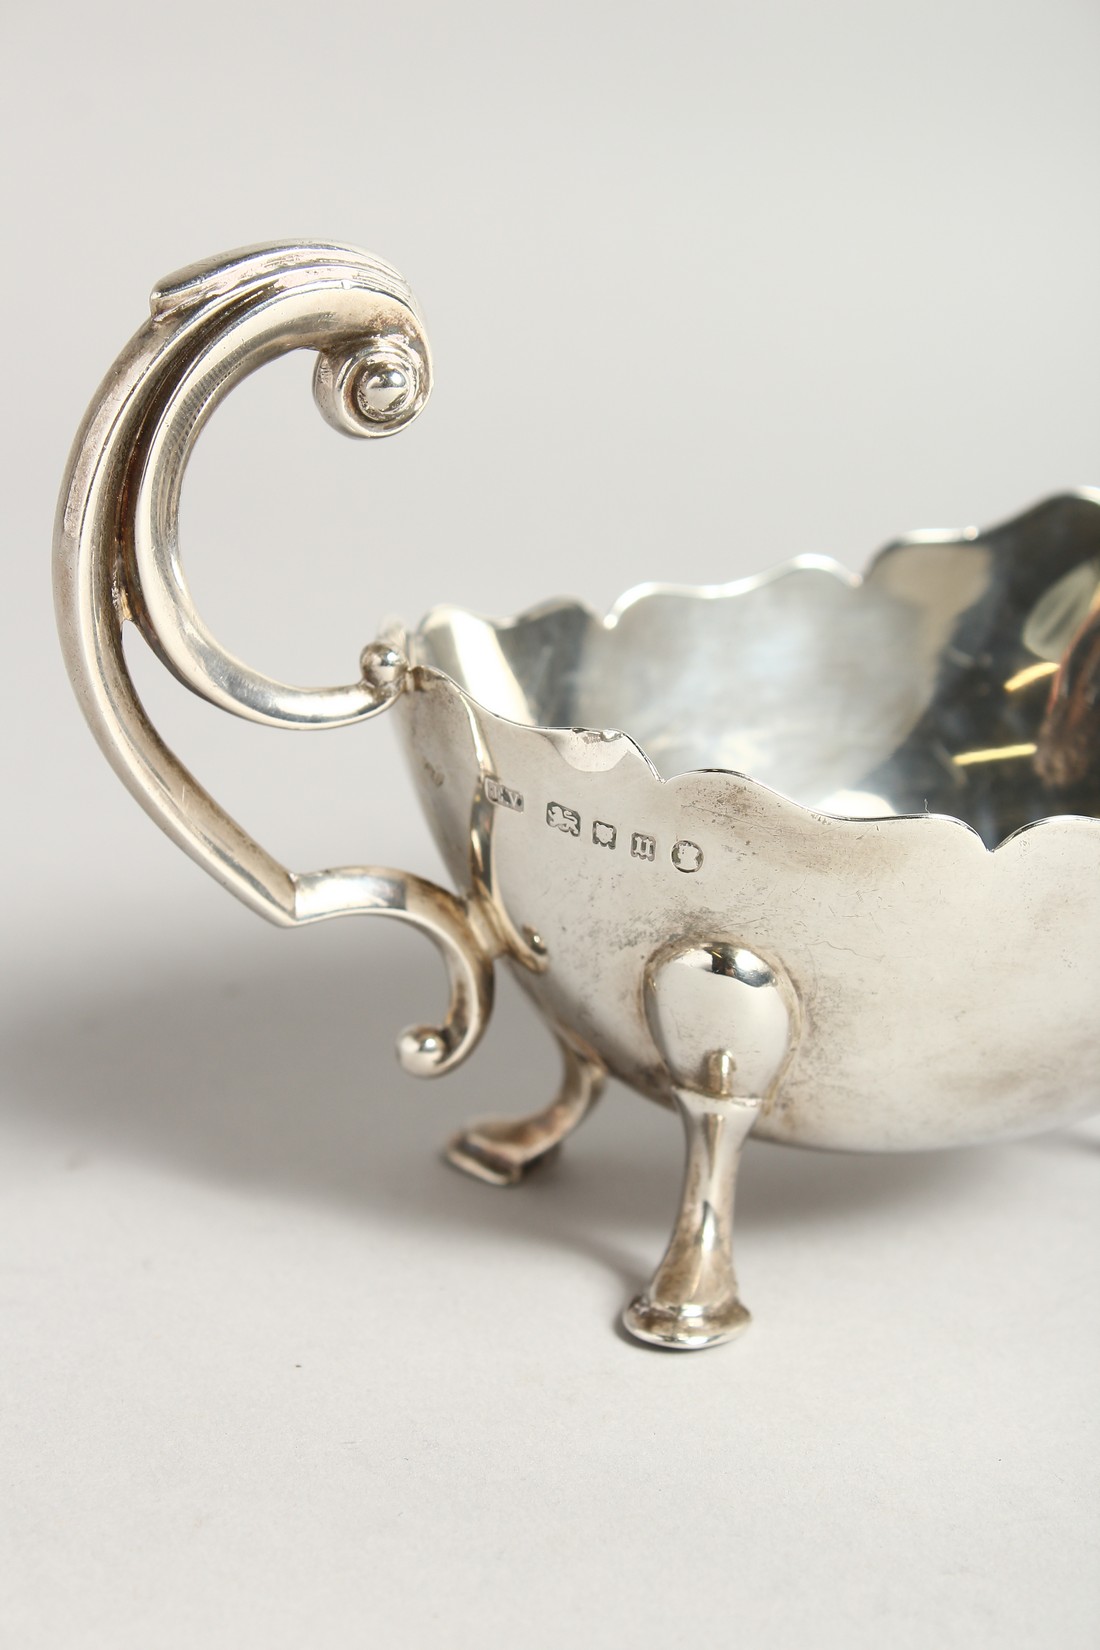 A GOOD HEAVY SILVER SAUCE BOAT with crest London 1935 Maker E.V. Weight 8ozs - Image 3 of 6